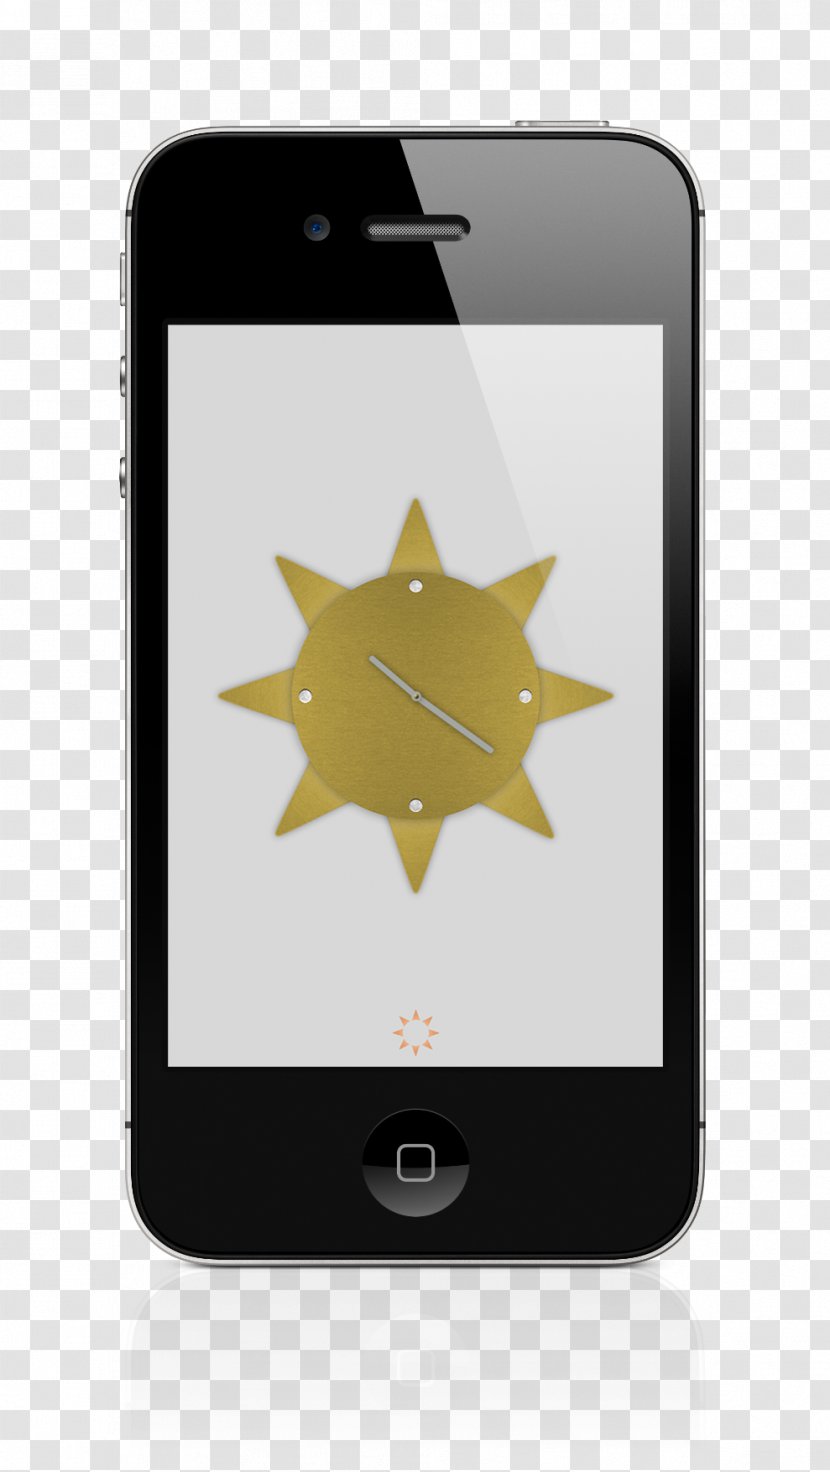 IPhone 4 App Store IPod Touch Apple - Iphone Transparent PNG